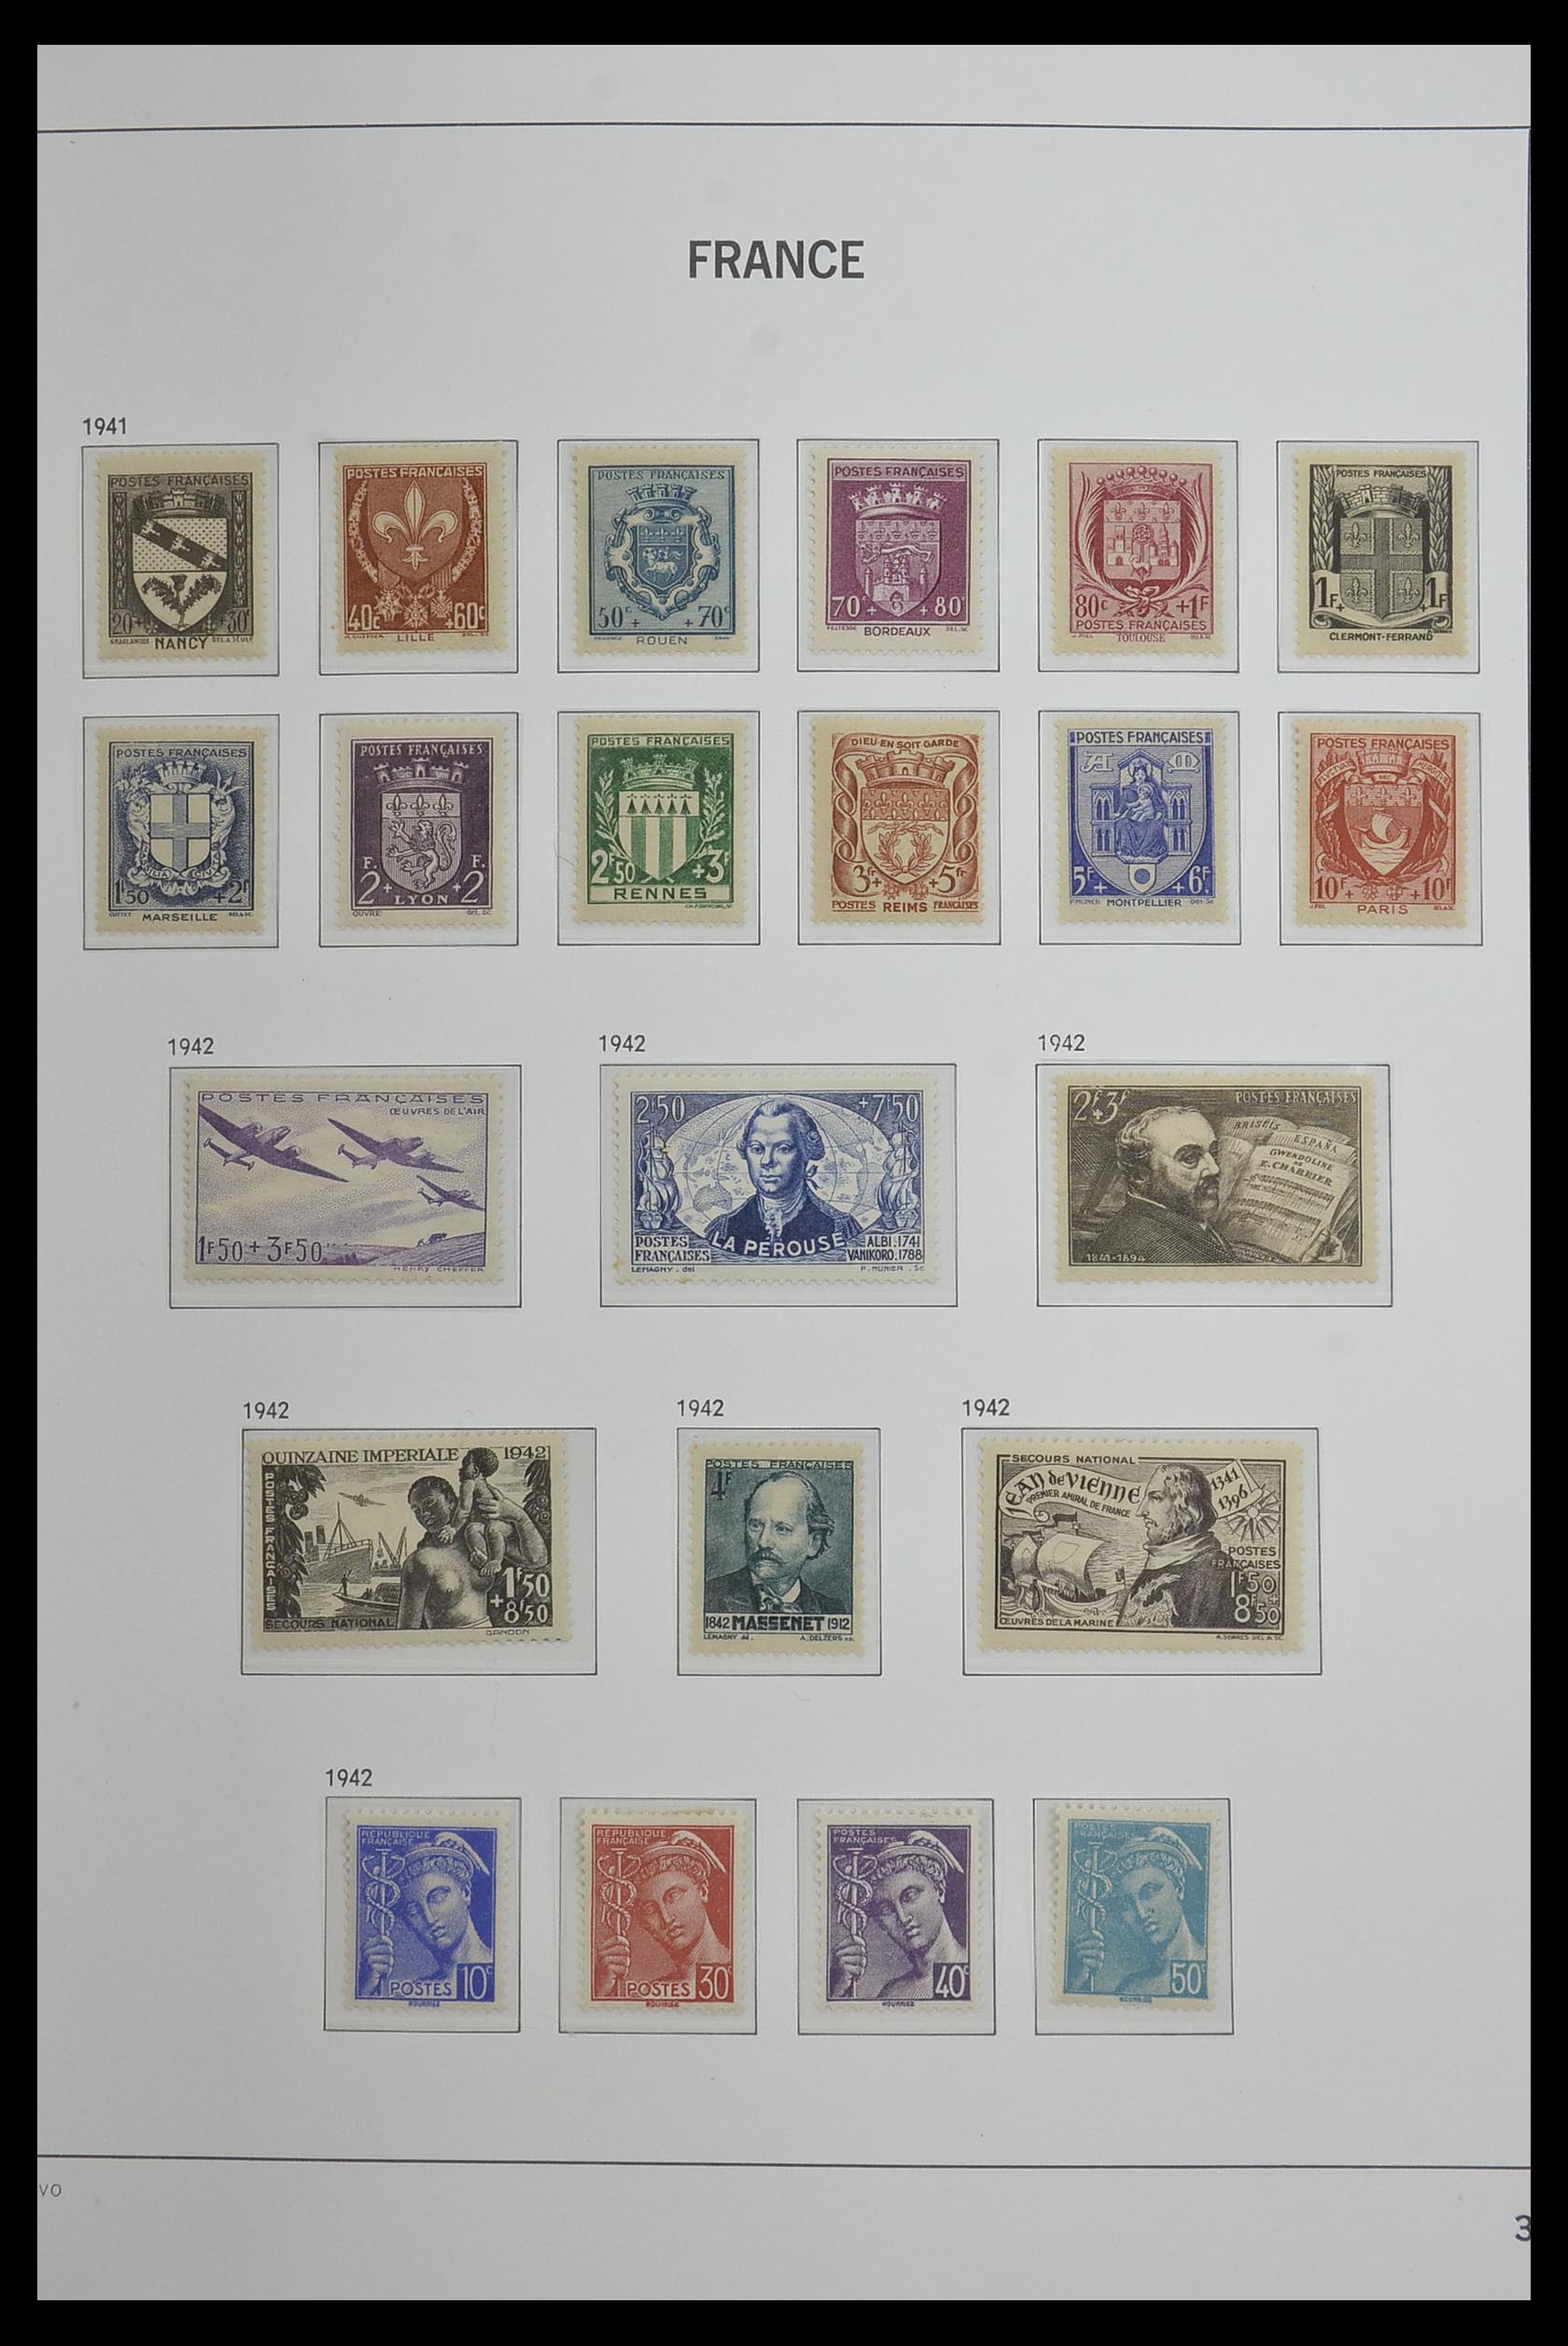 33480 033 - Stamp collection 33480 France 1849-1993.